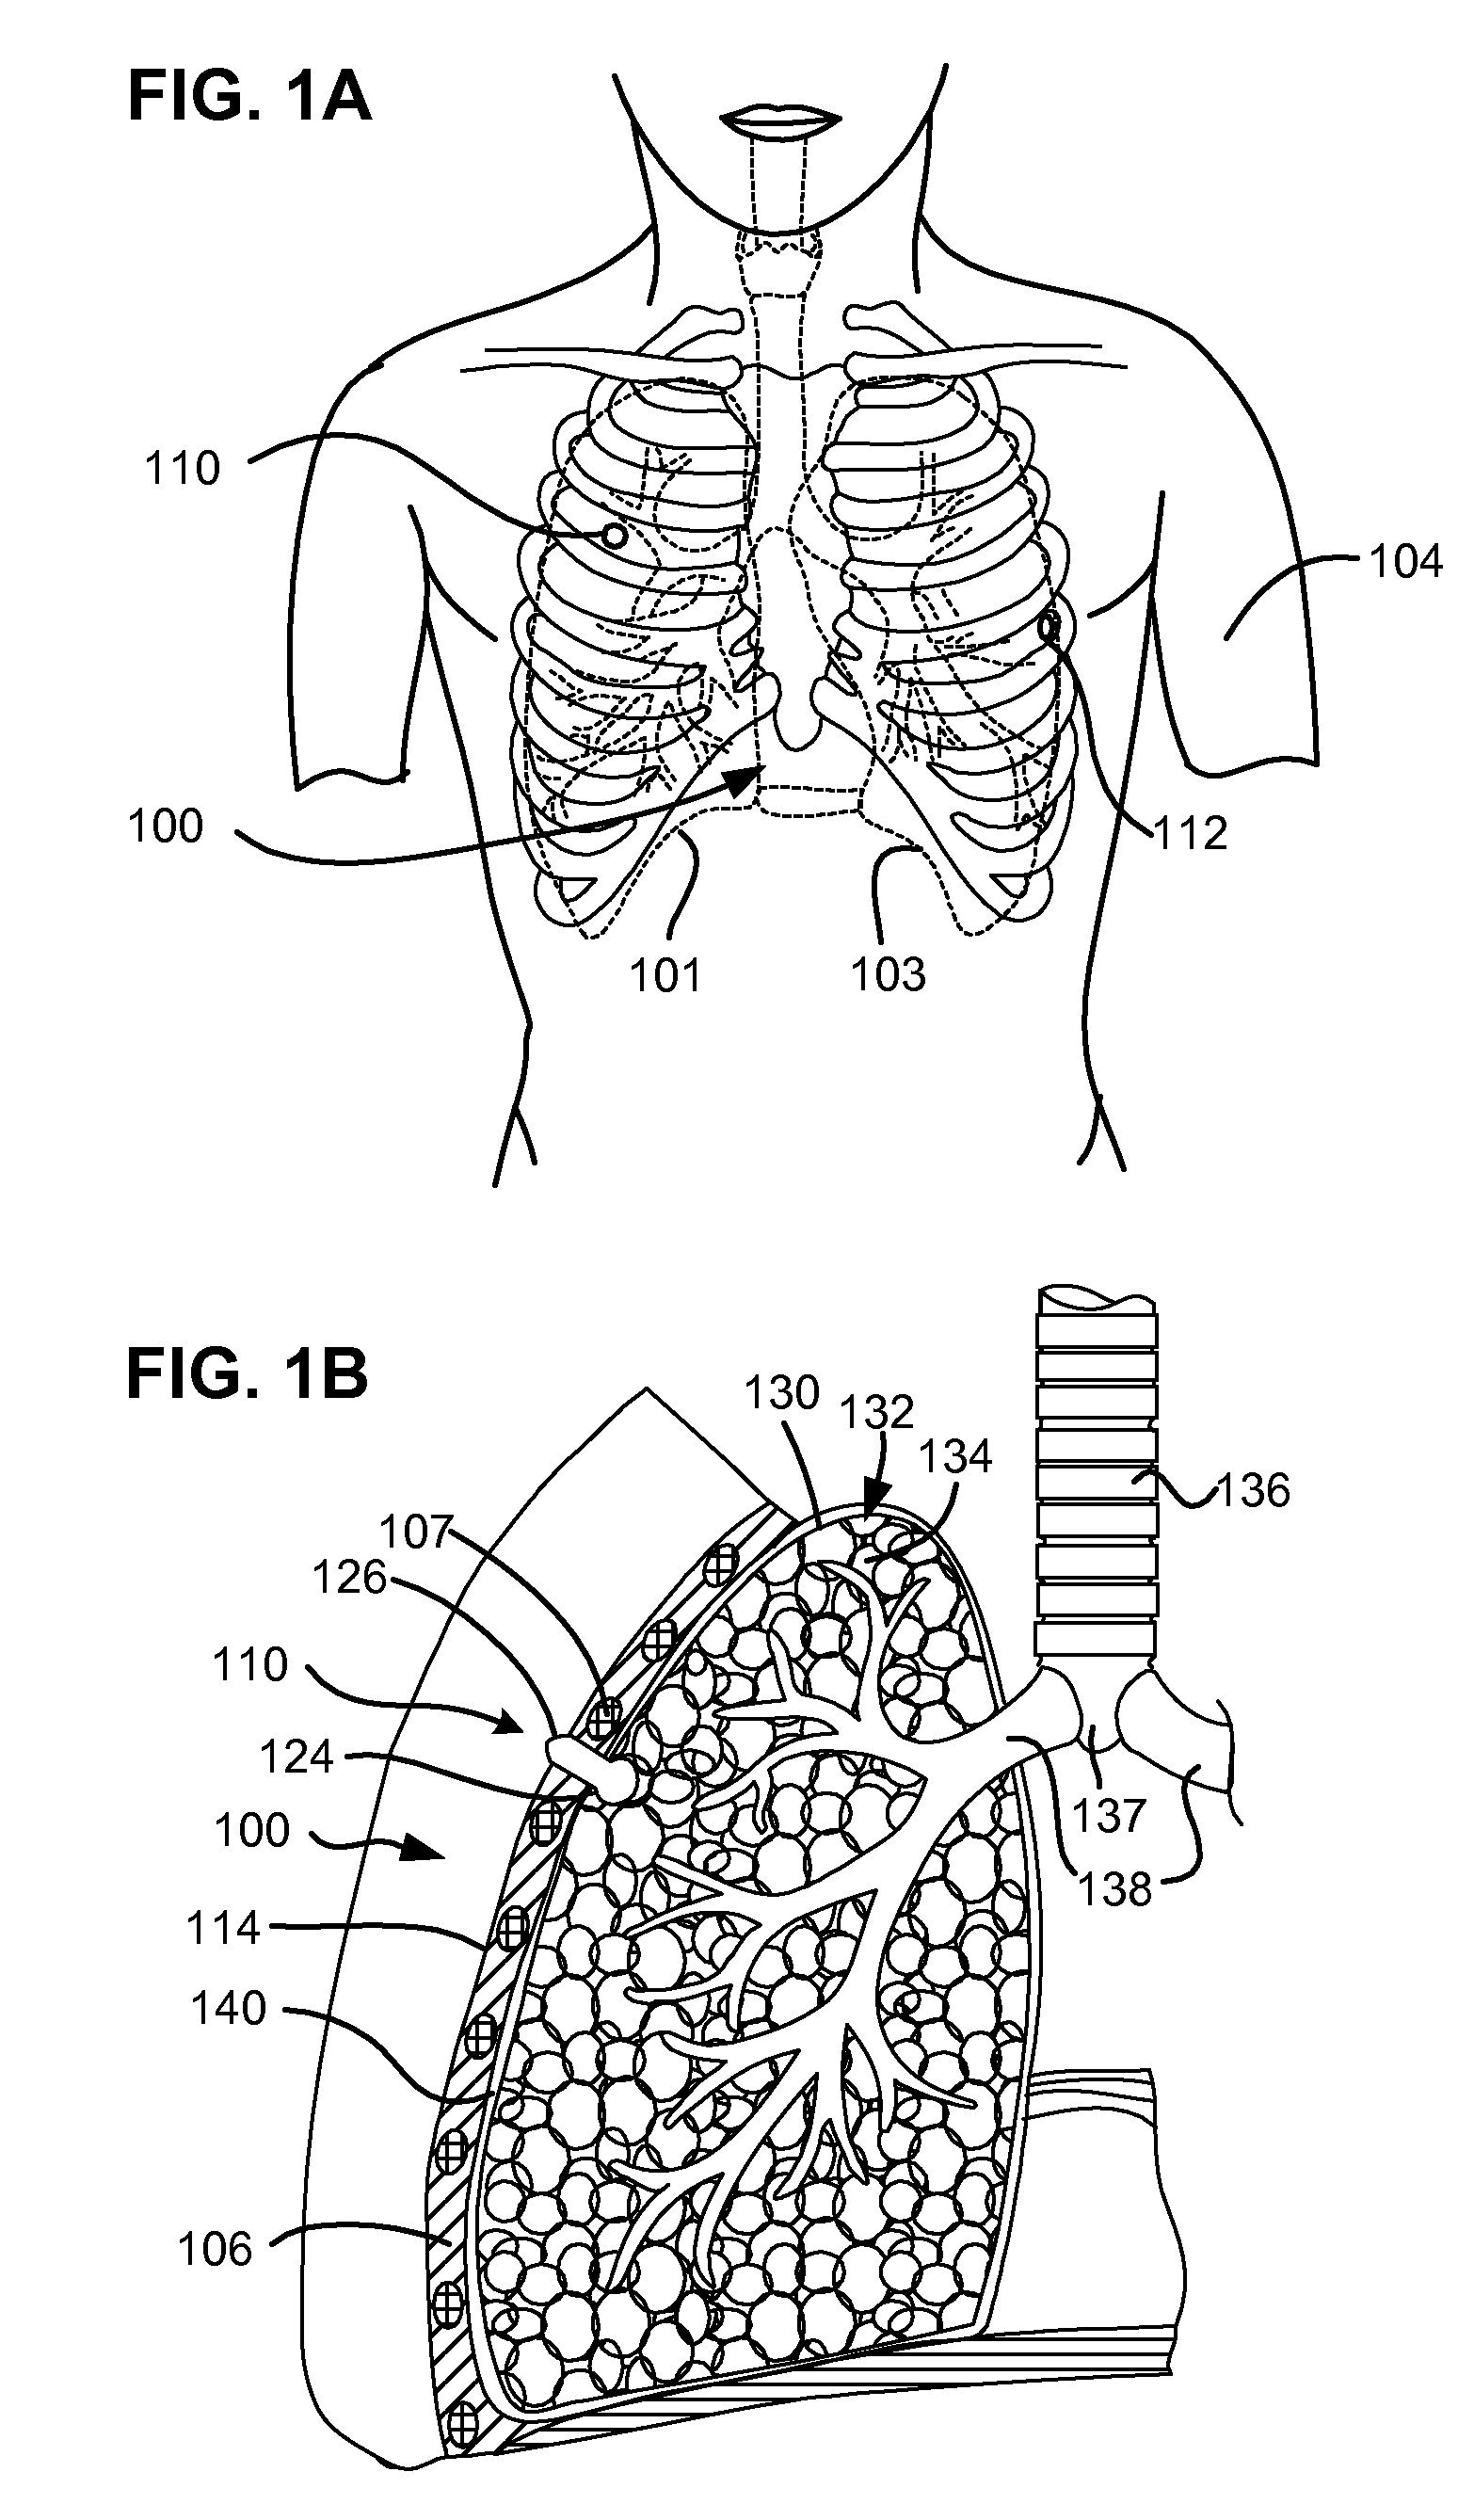 Variable length pneumostoma management system for treatment of chronic obstructive pulmonary disease